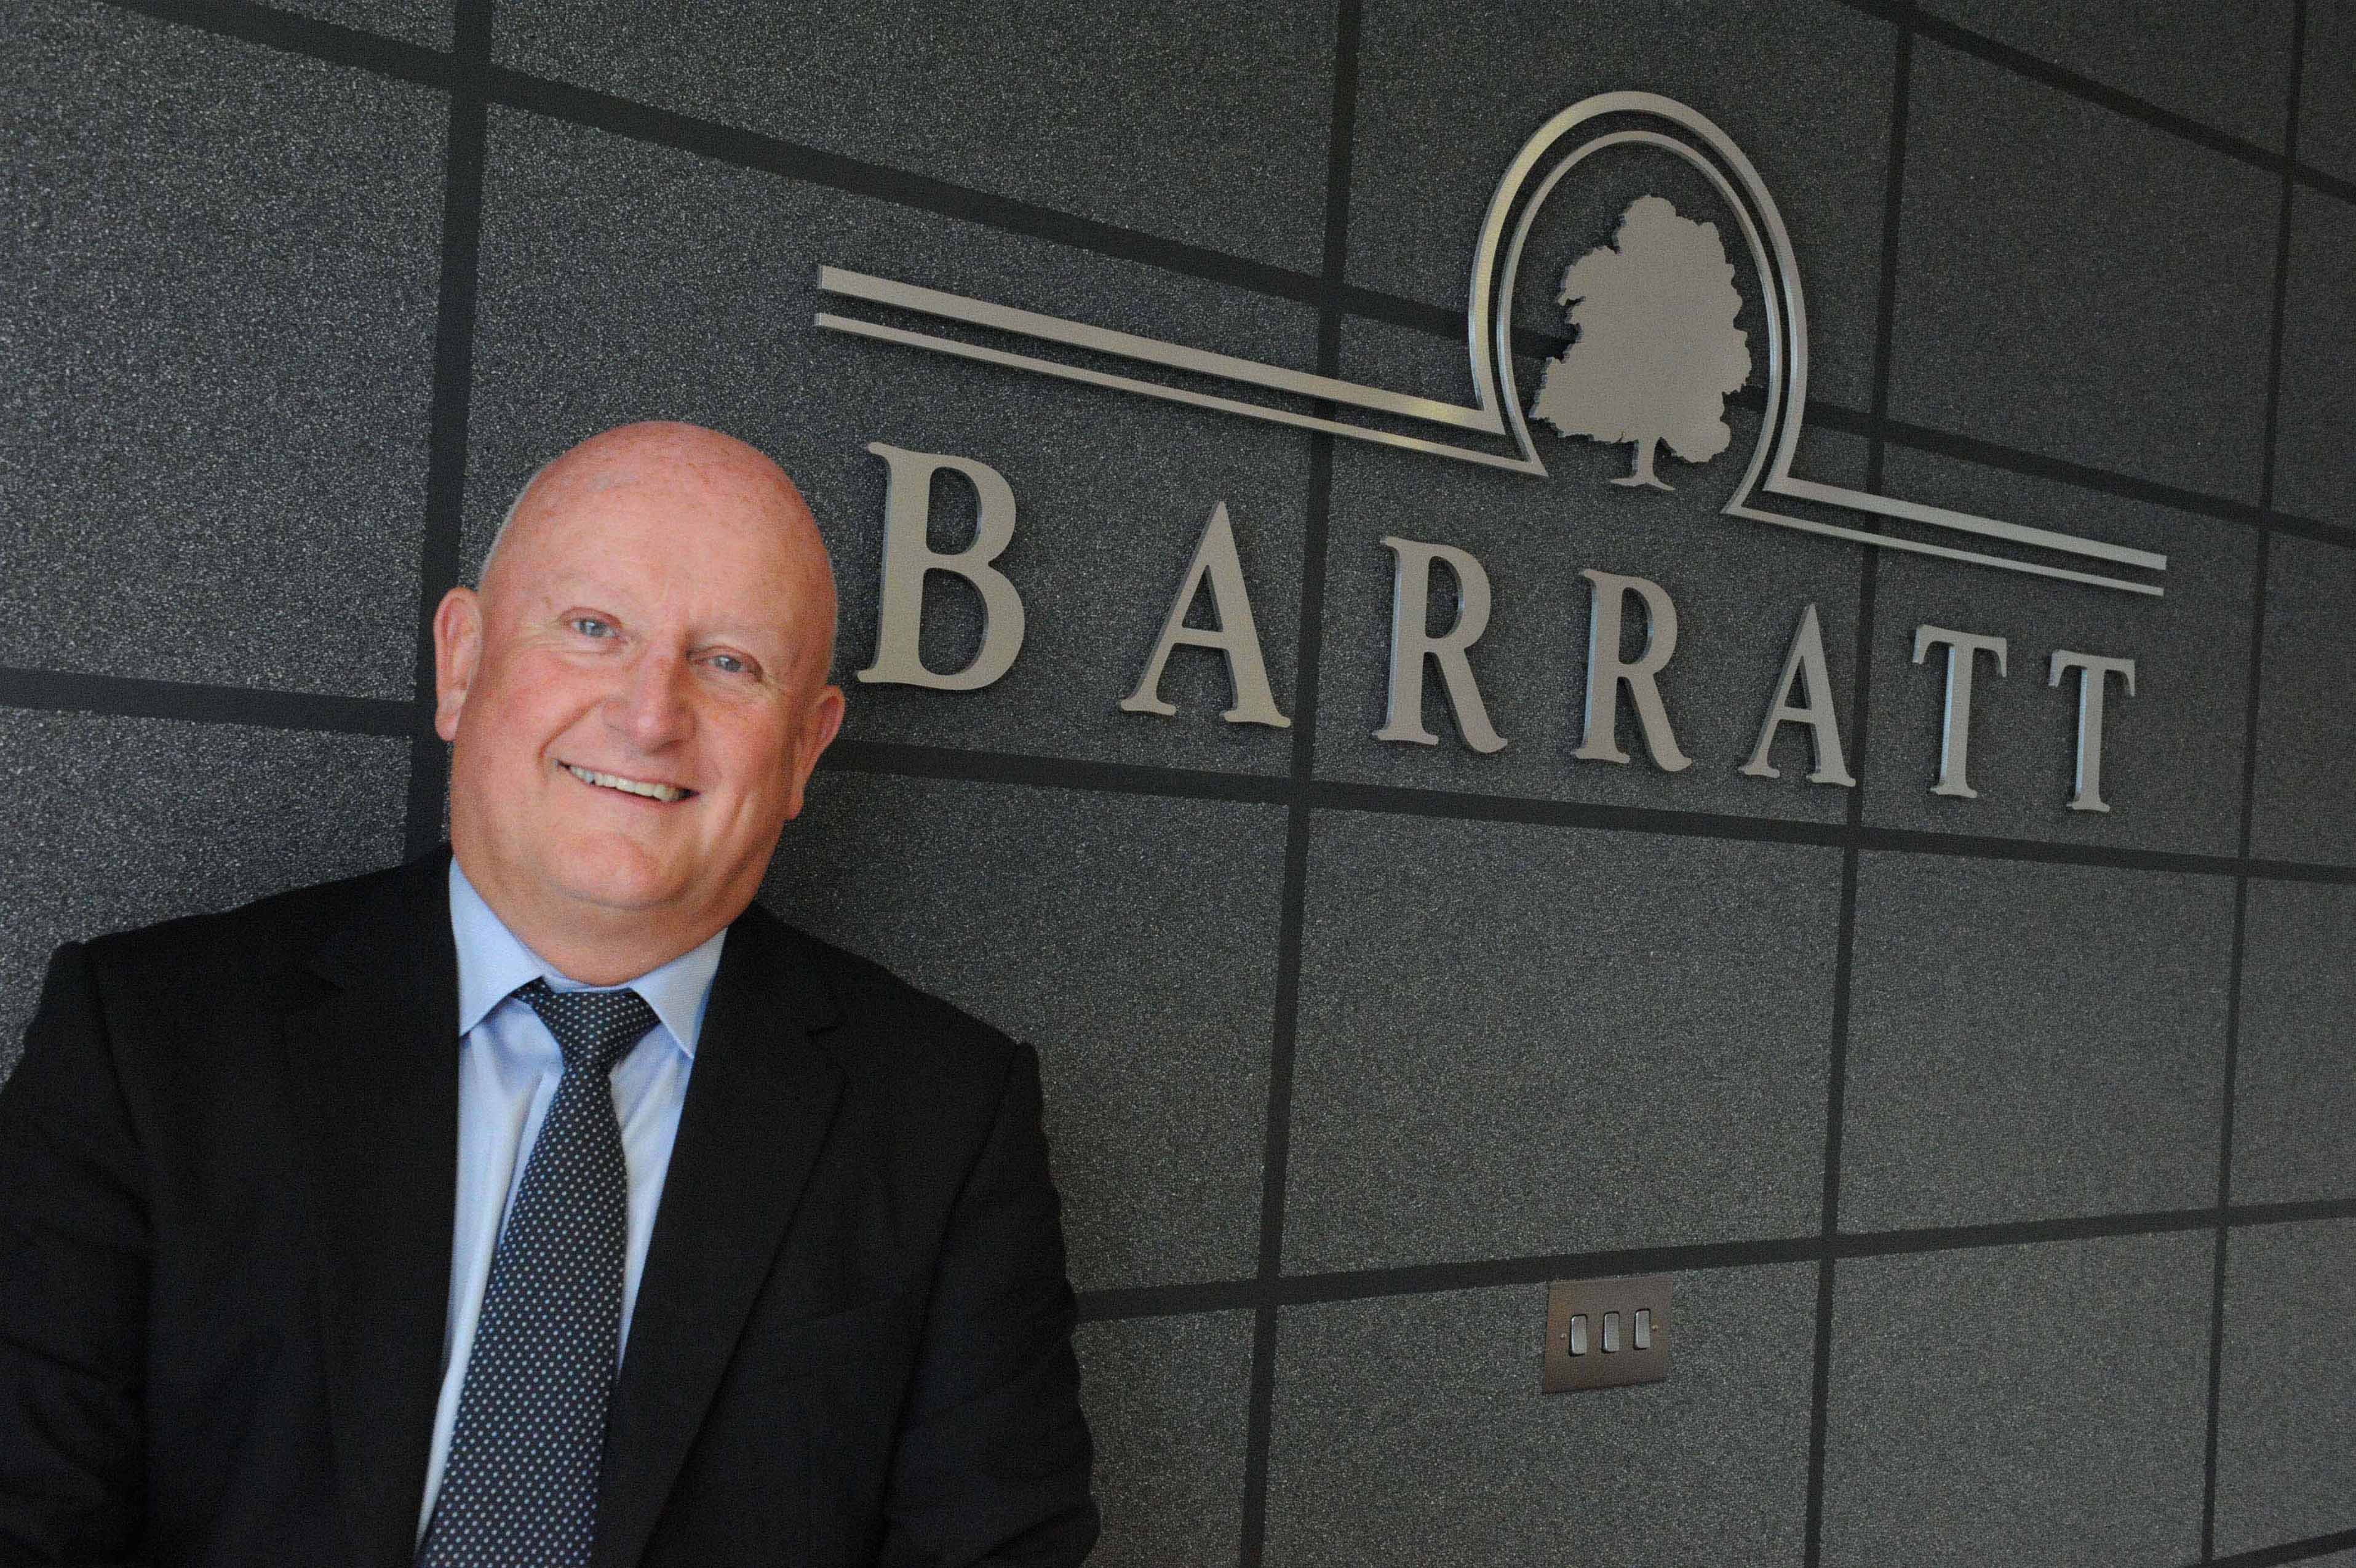 Barratt secures five-star rating for record 15 years in a row